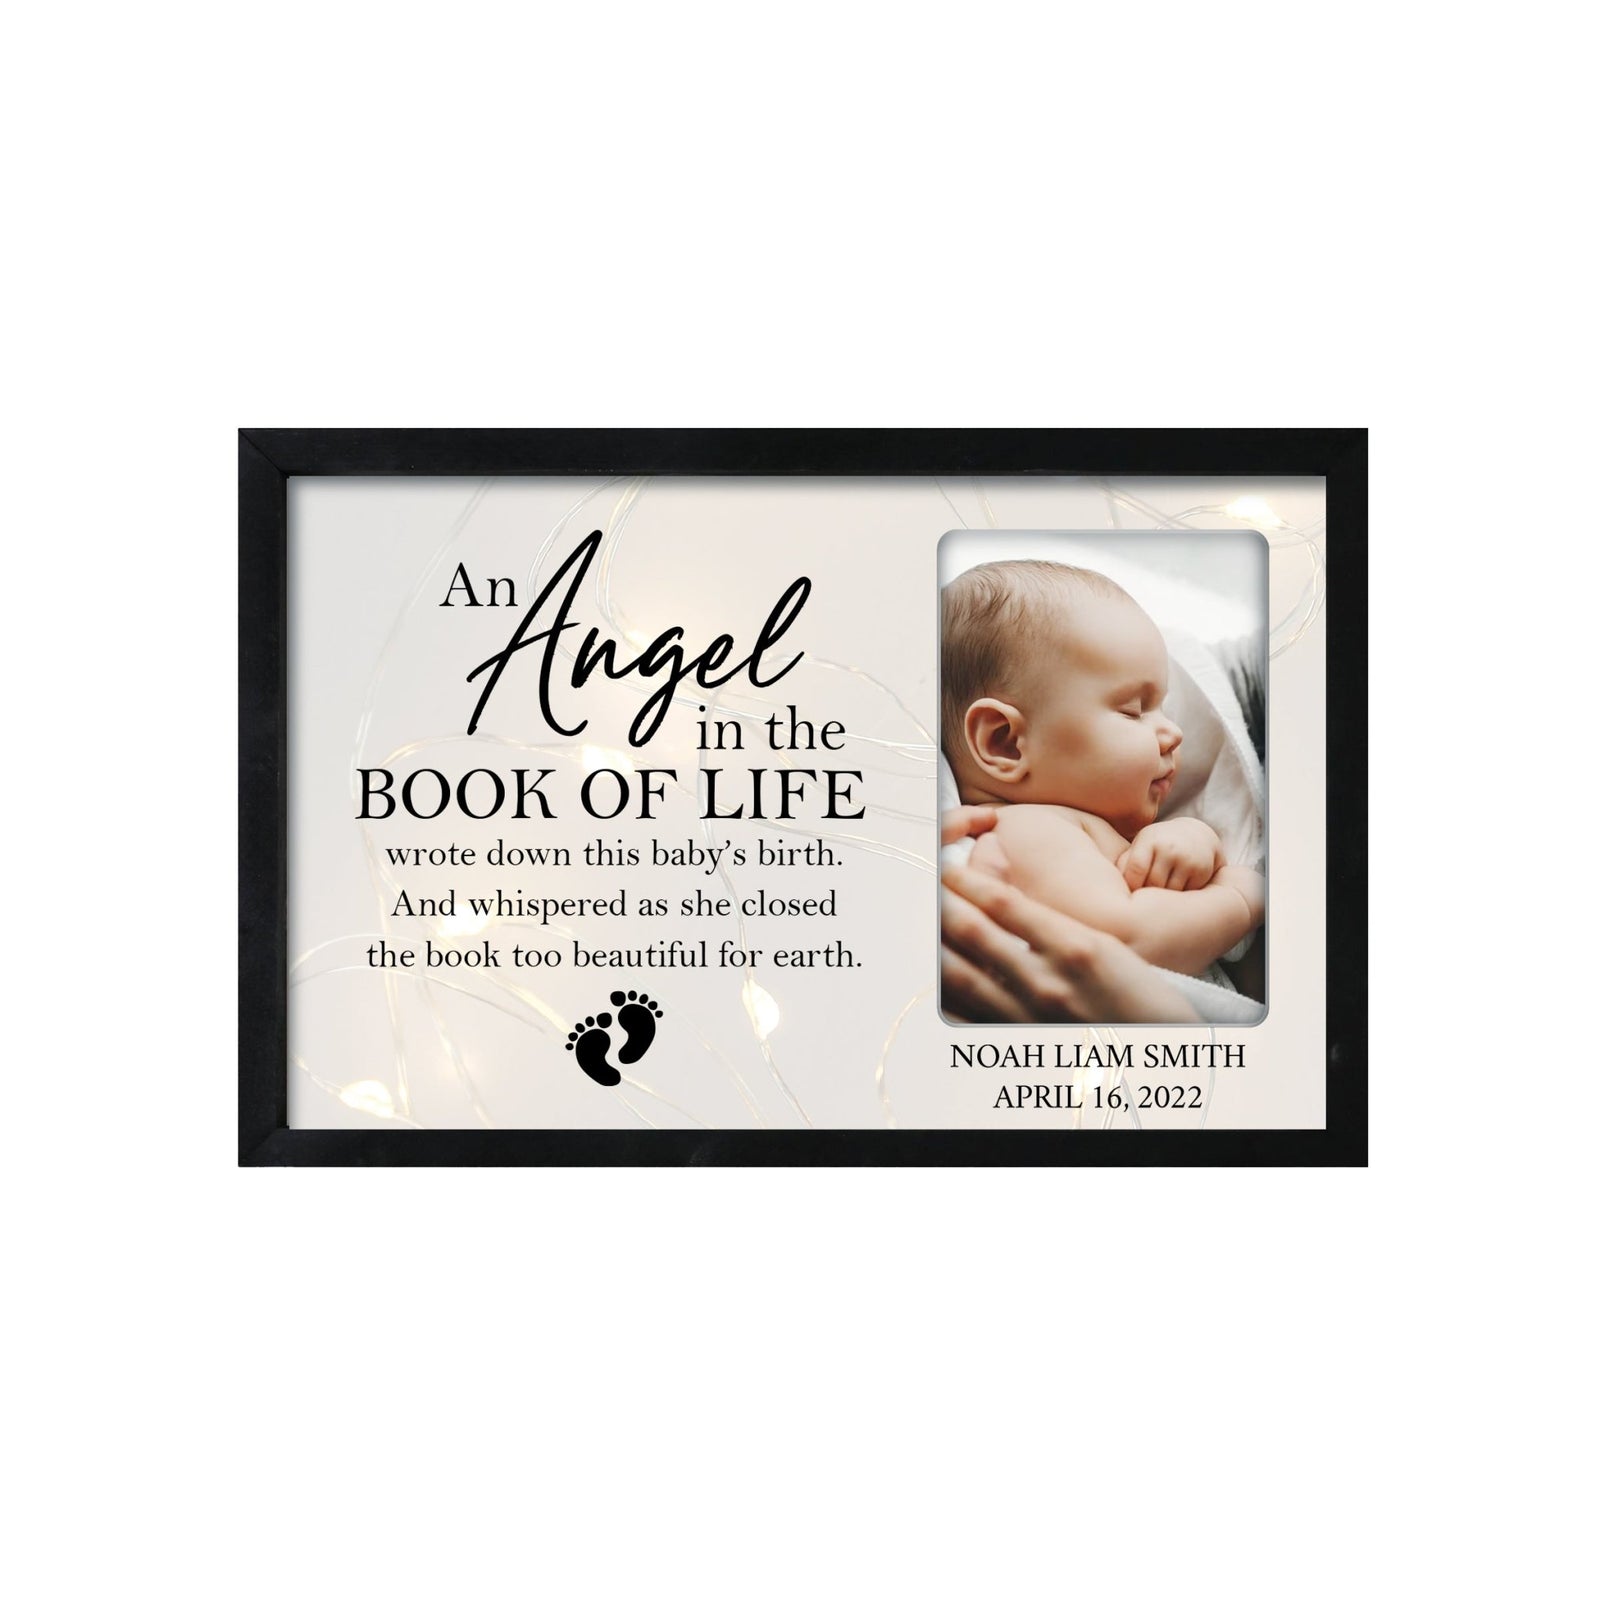 Personalized Memorial Black Framed Shadow Box With Lights Sympathy Gift Wall Décor - An Angel In The Book Of Life - LifeSong Milestones